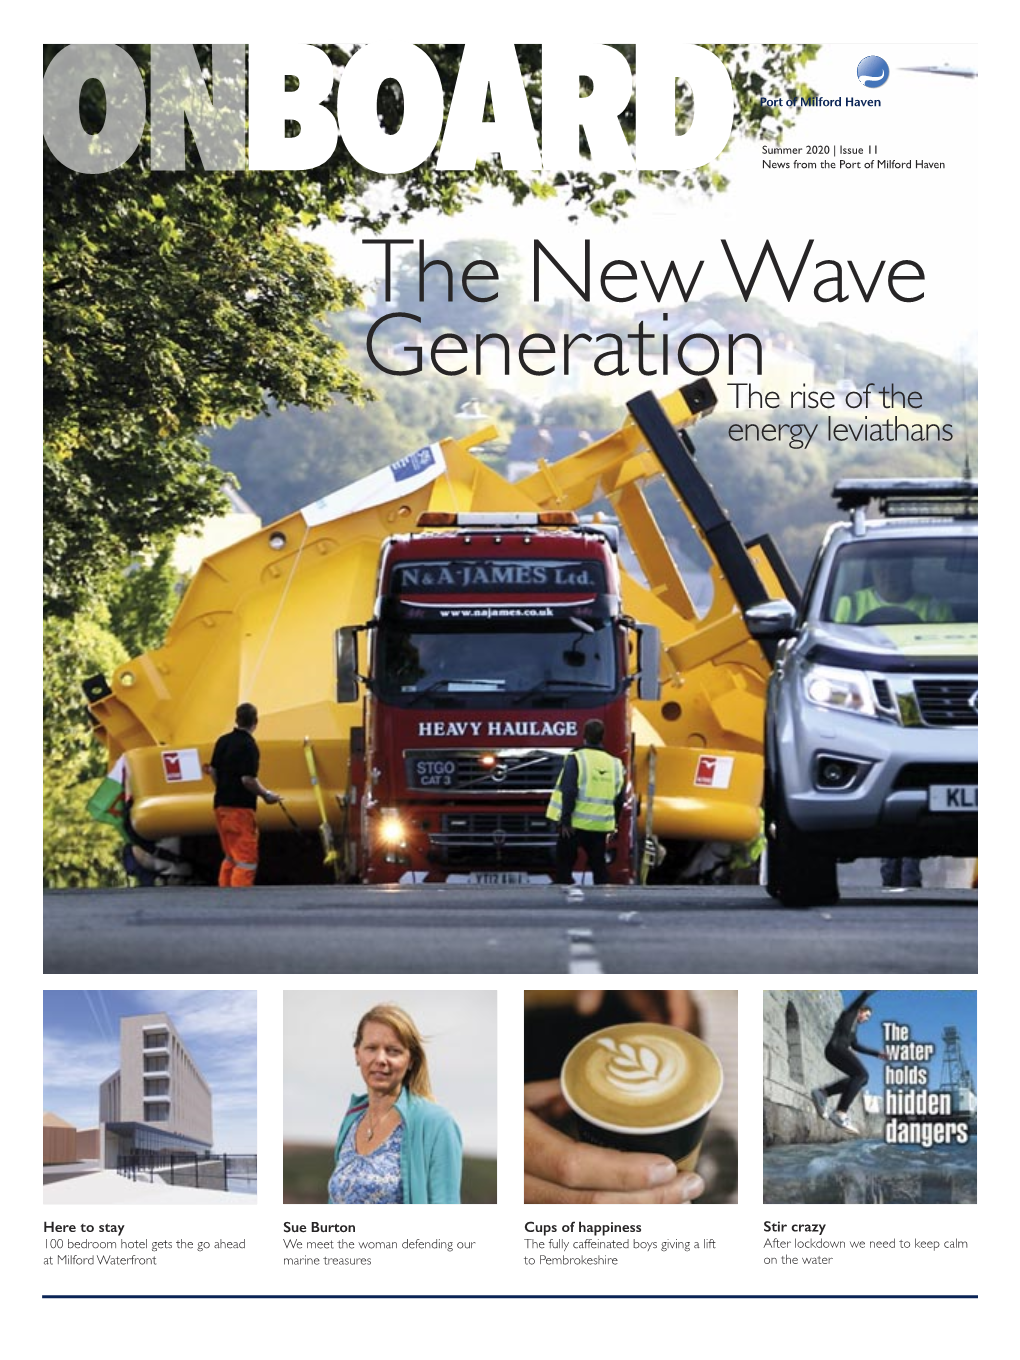 The New Wave Generation the Rise of the Energy Leviathans